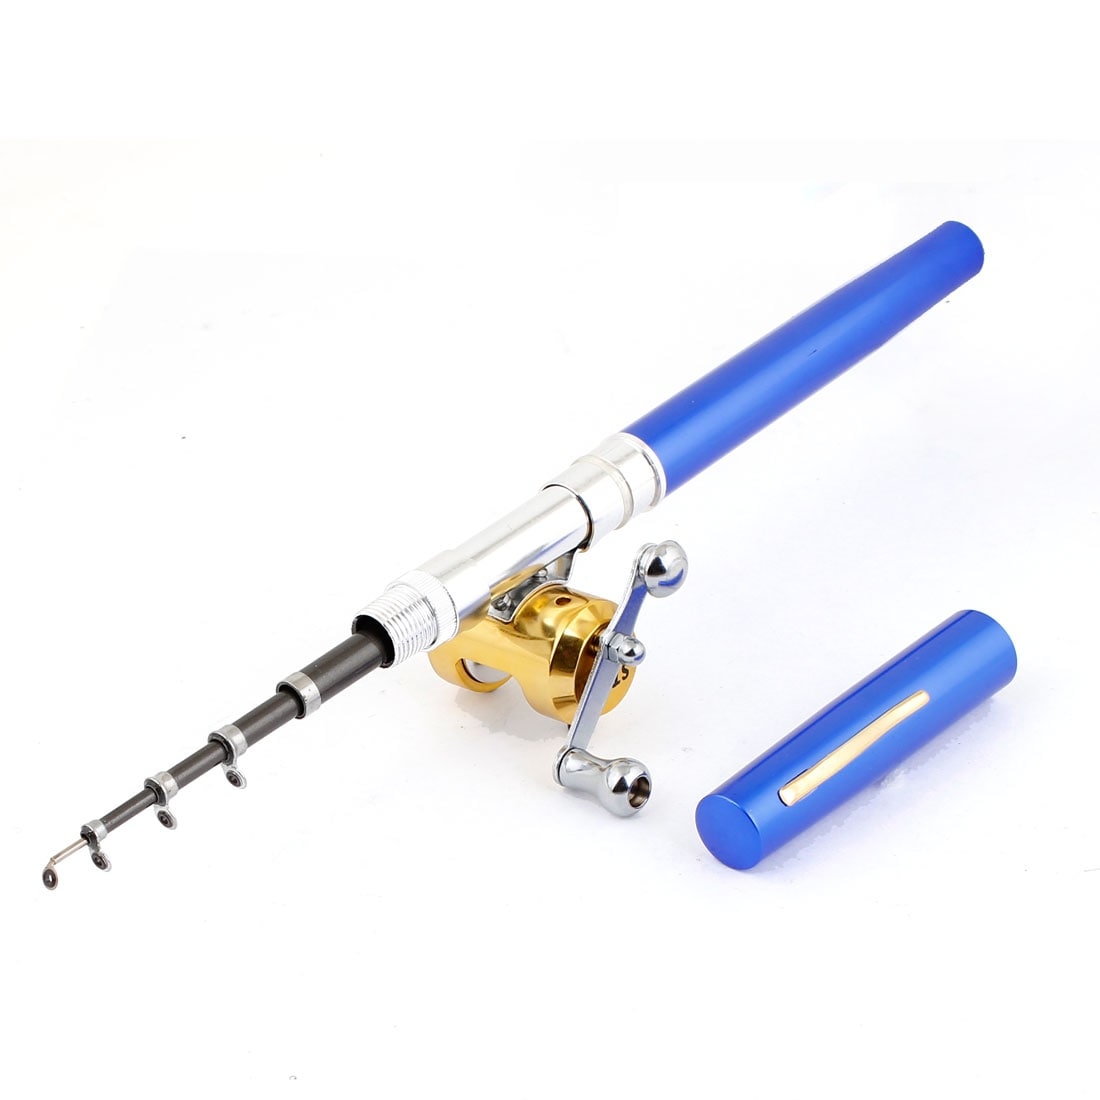 Unique Bargains Blue 38 Telescoping 5 Sections Mini Fishing Rod Pole Reel  Angling Gear - Bed Bath & Beyond - 17627473